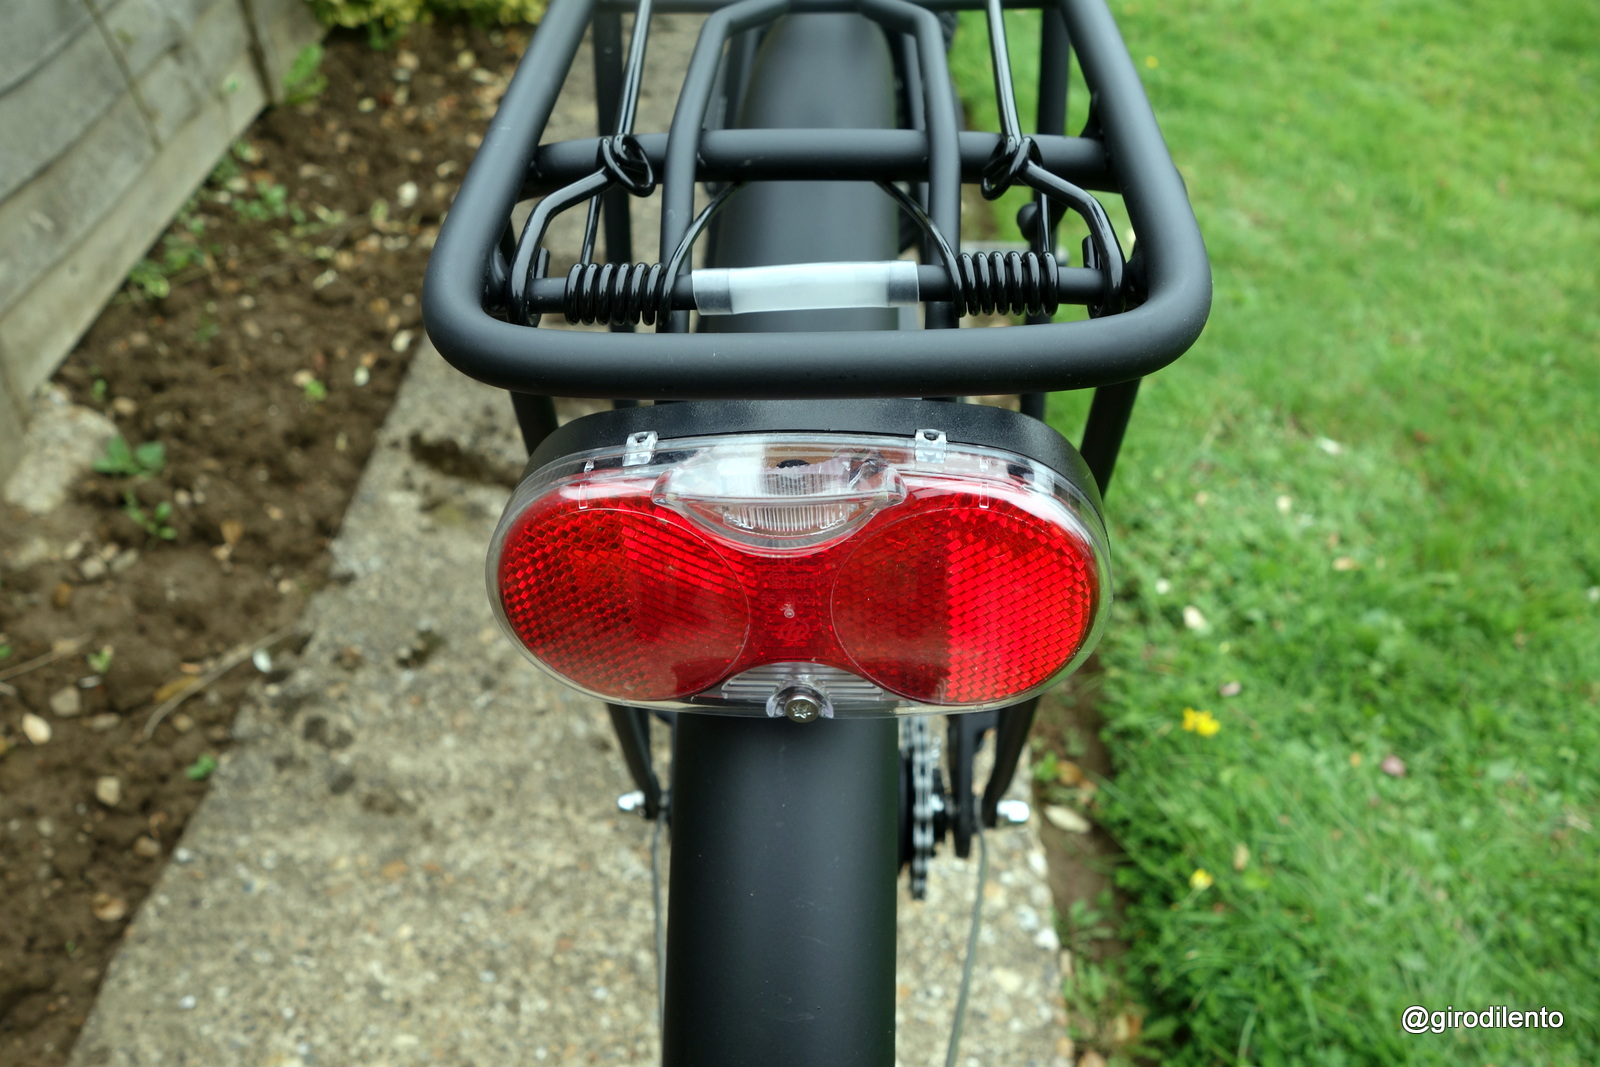 Battery operated rear light - not super bright but works well with good sized reflectors